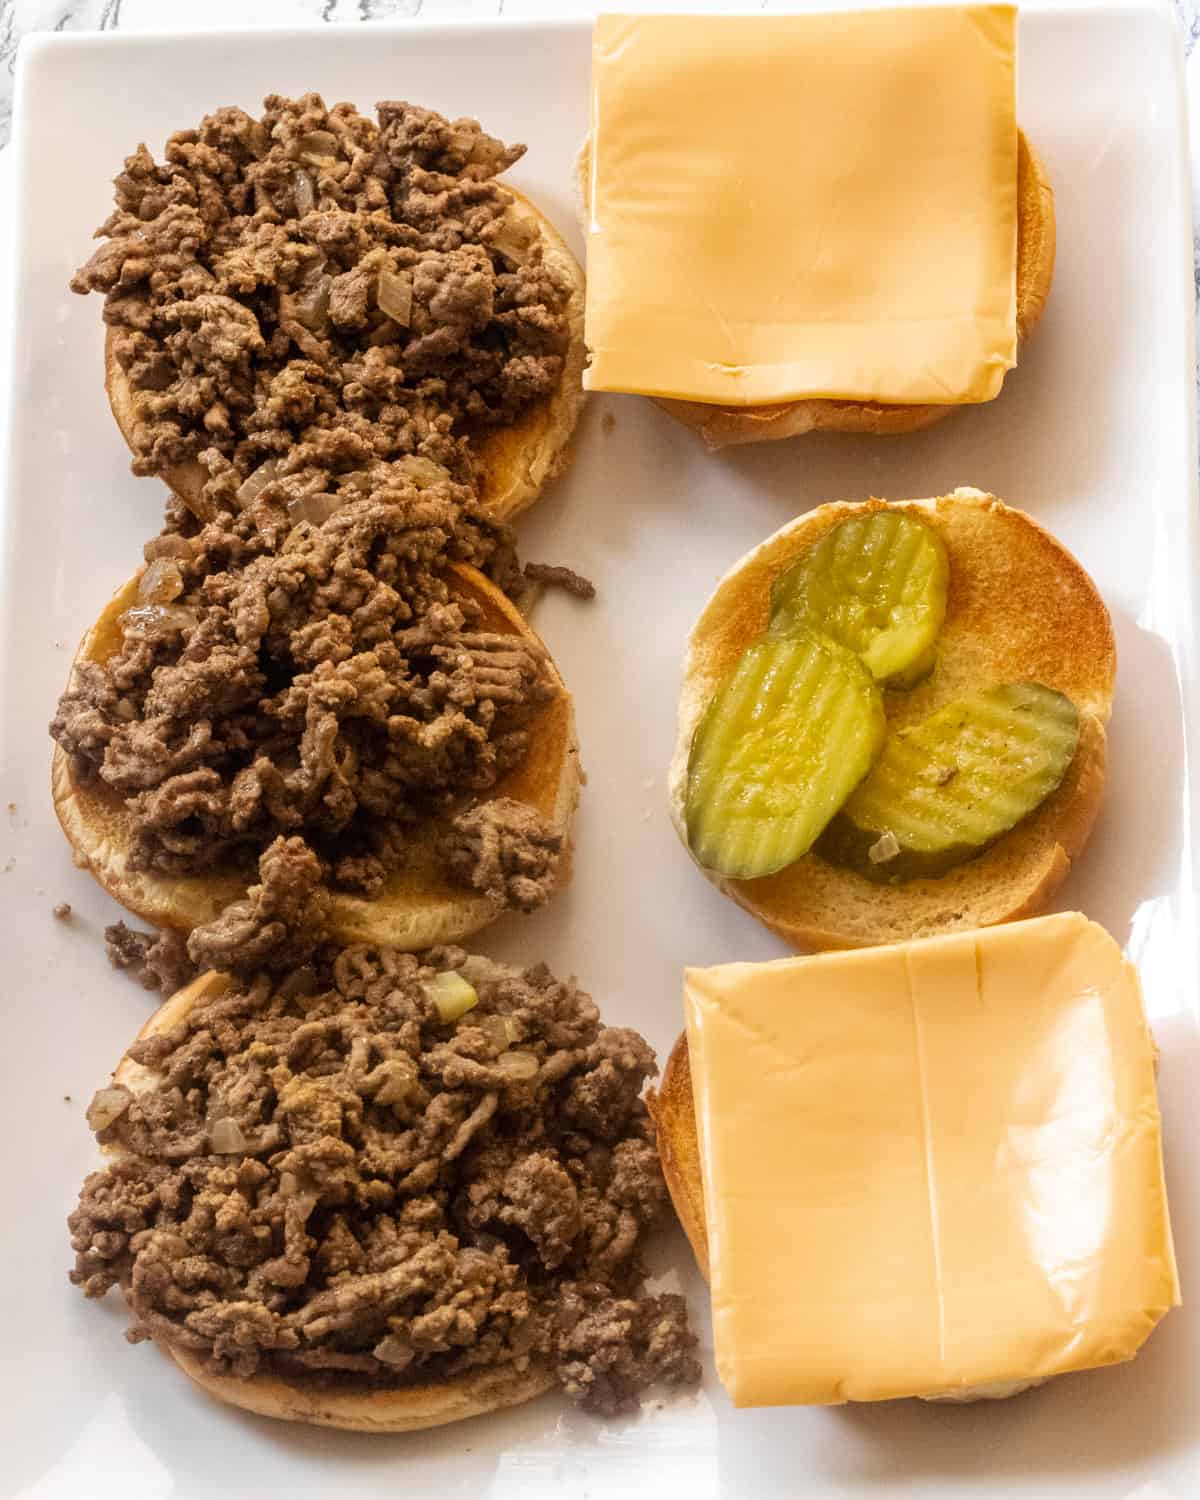 3 open-faced loose meat sandwiches, 2 with cheese, 1 with pickles